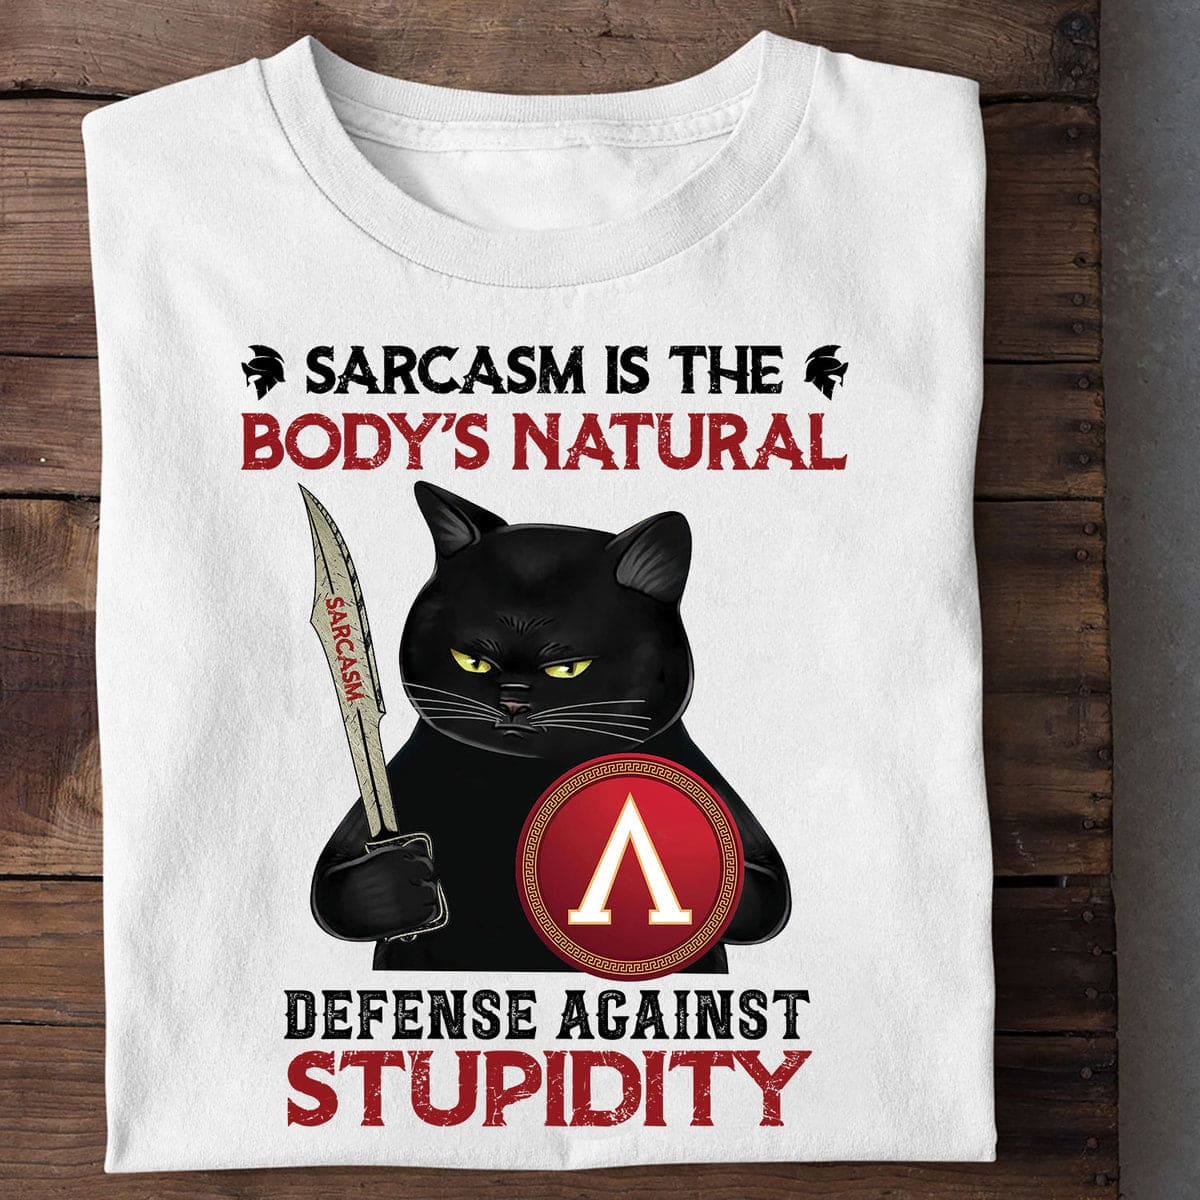 Black Cat Spartan Shield - Sarcasm is the body's natural defense against stupidity